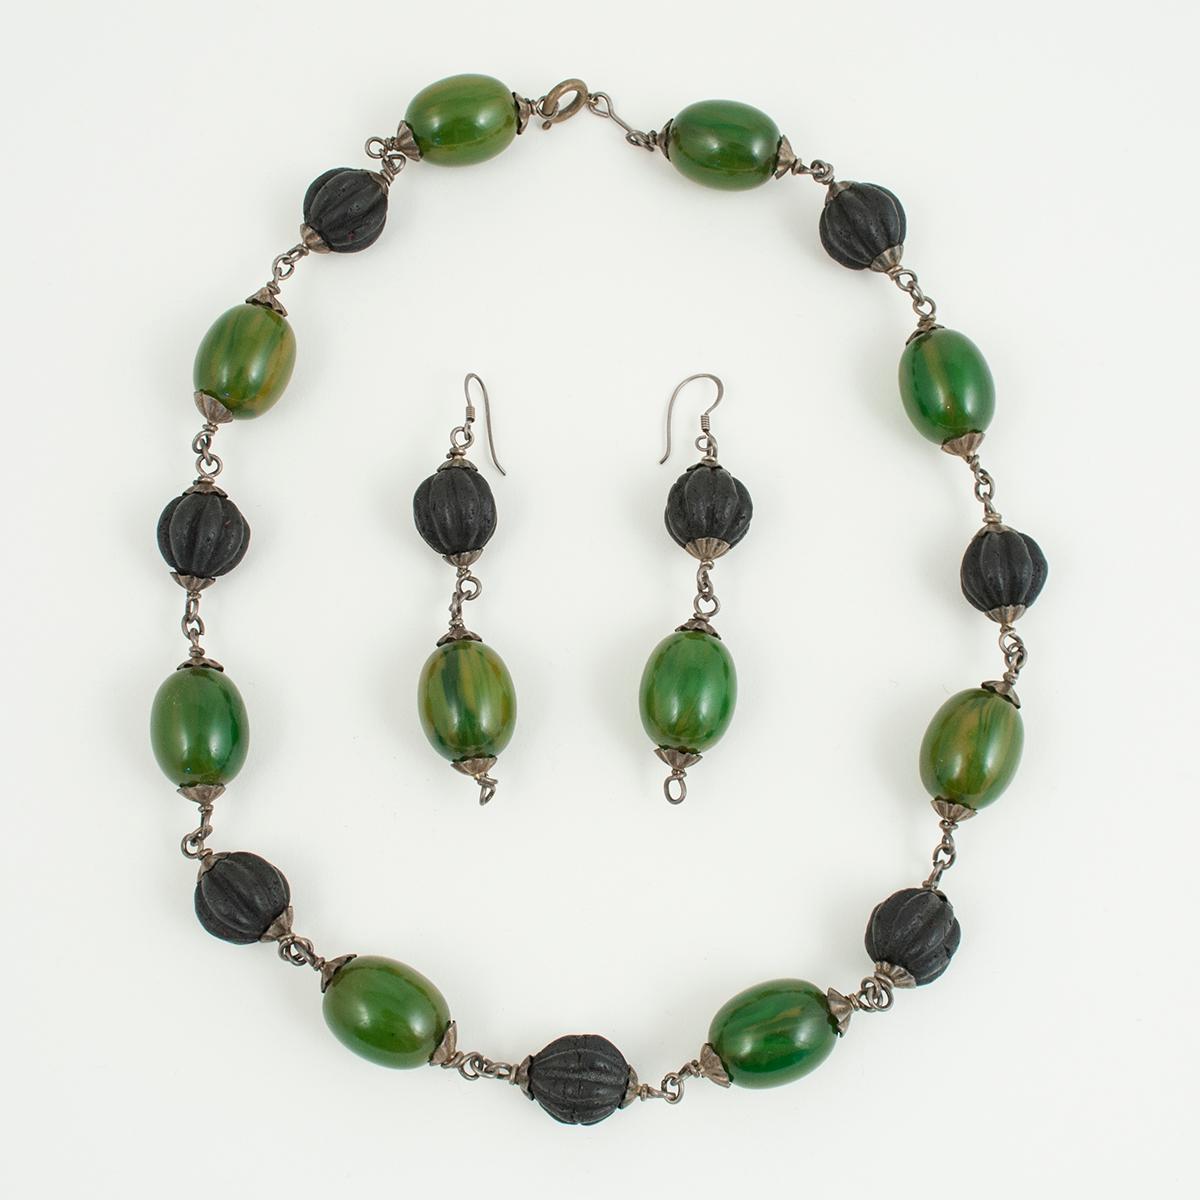 Tribal Mid-20th Century Bakelite and Amber Paste Bead Necklace and Earrings, Tunisia